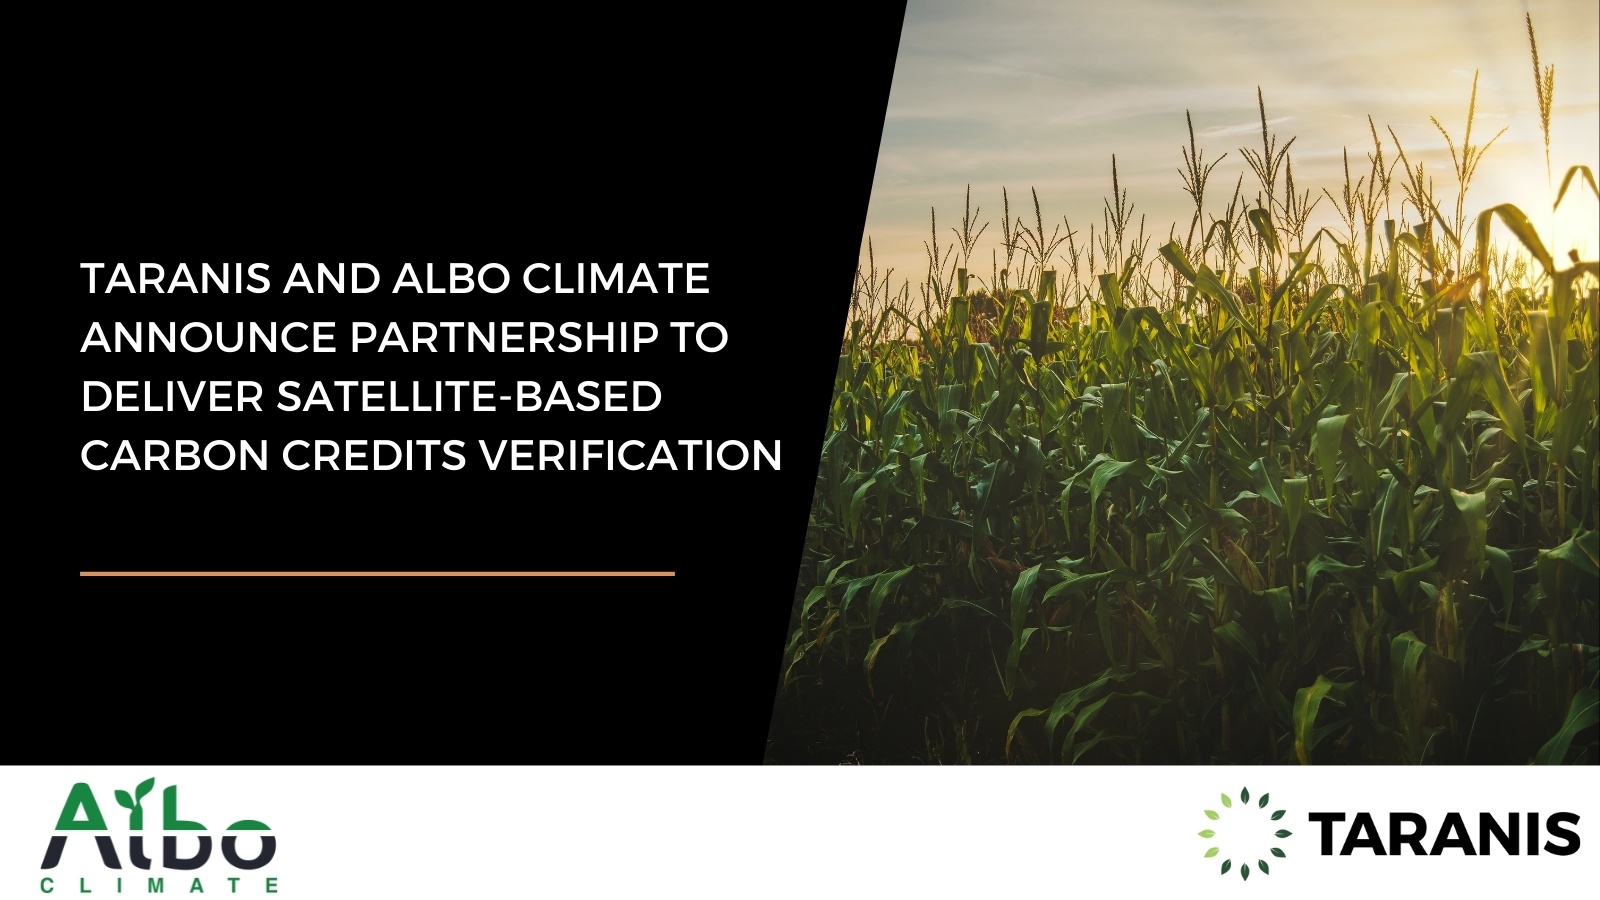 Taranis and Albo Climate announce a partnership to alleviate the bottleneck in verifying carbon sequestration in farmland